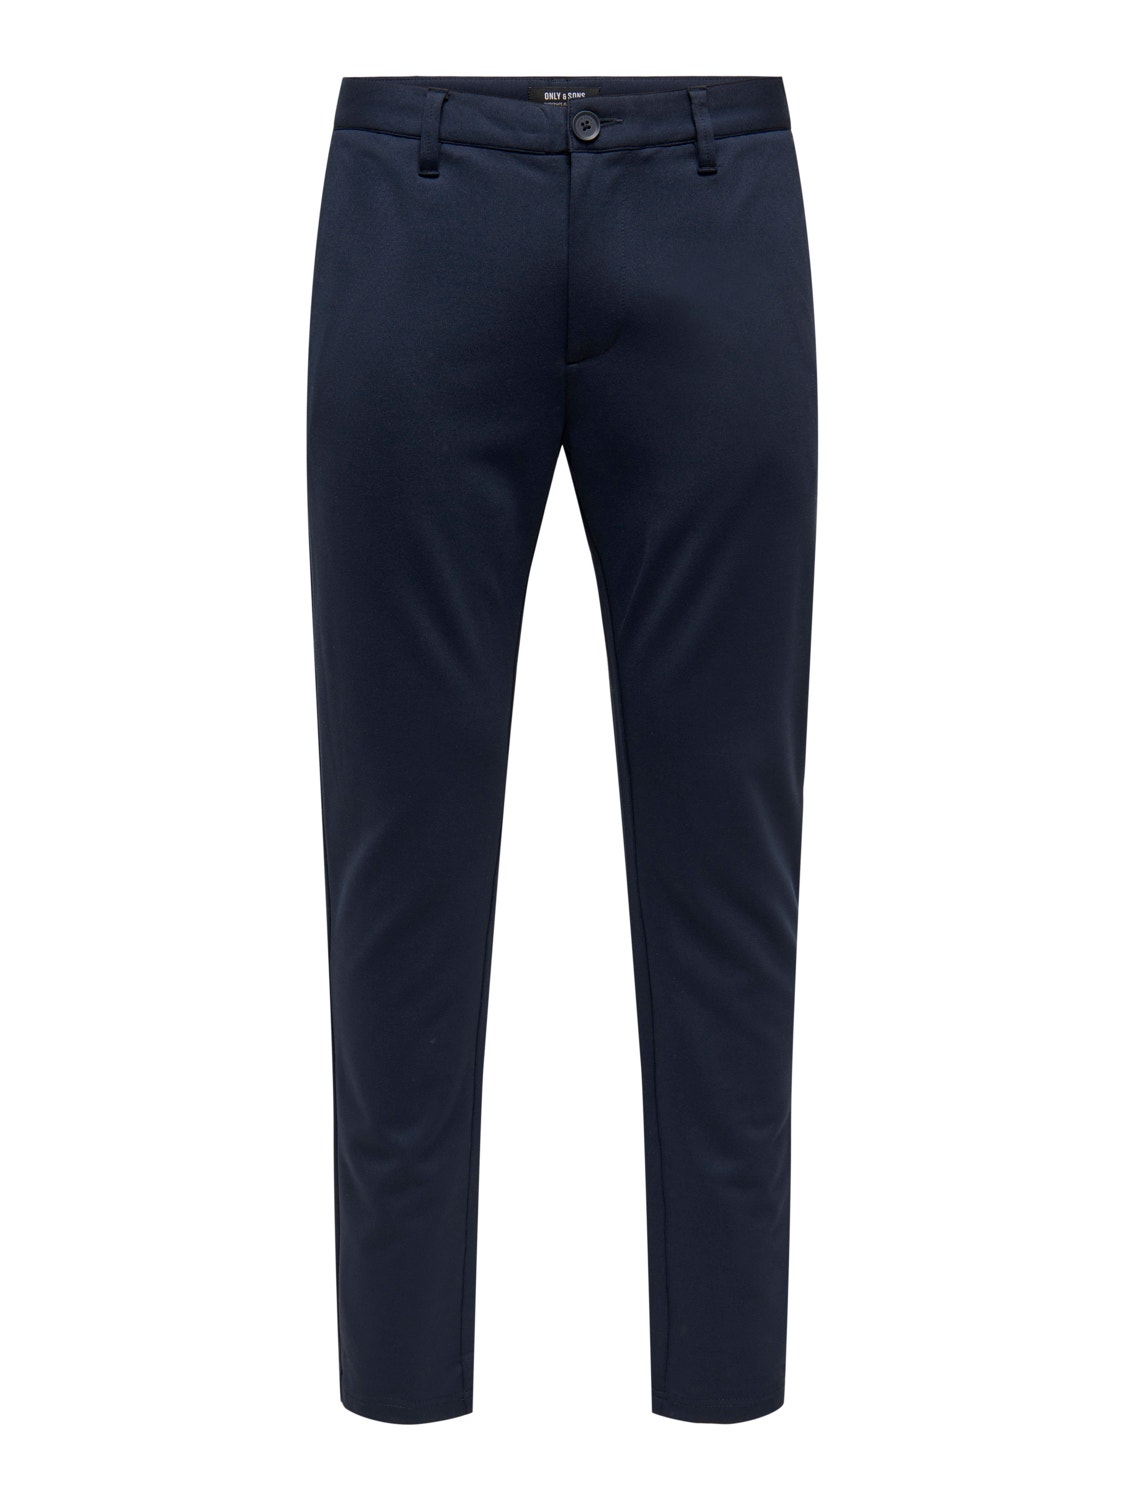 ONLY & SONS Normal geschnitten Chino Hose -Night Sky - 22022910